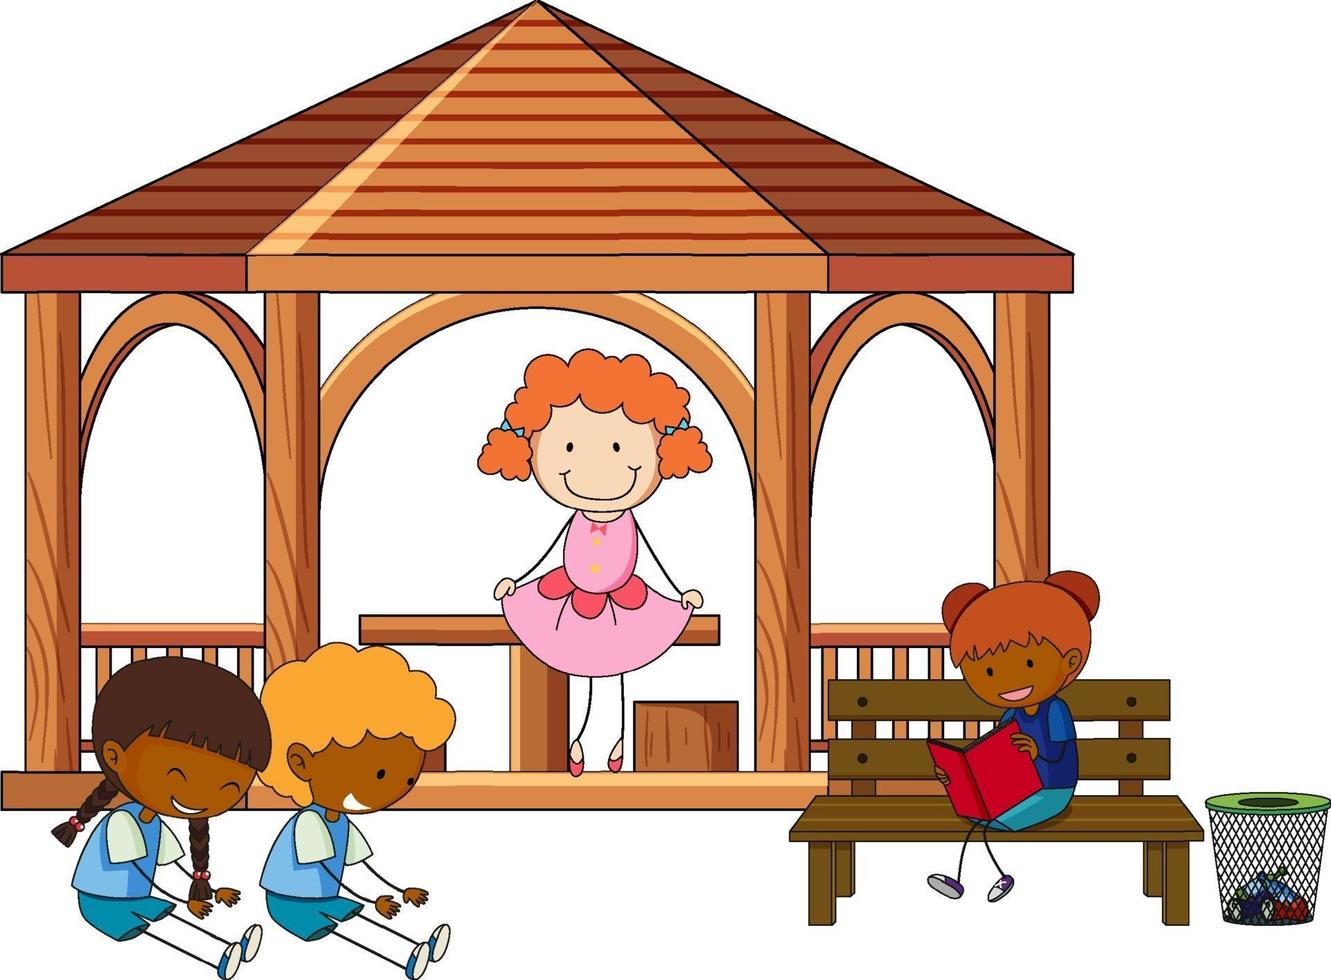 Many kids doing different activities in gazebo vector